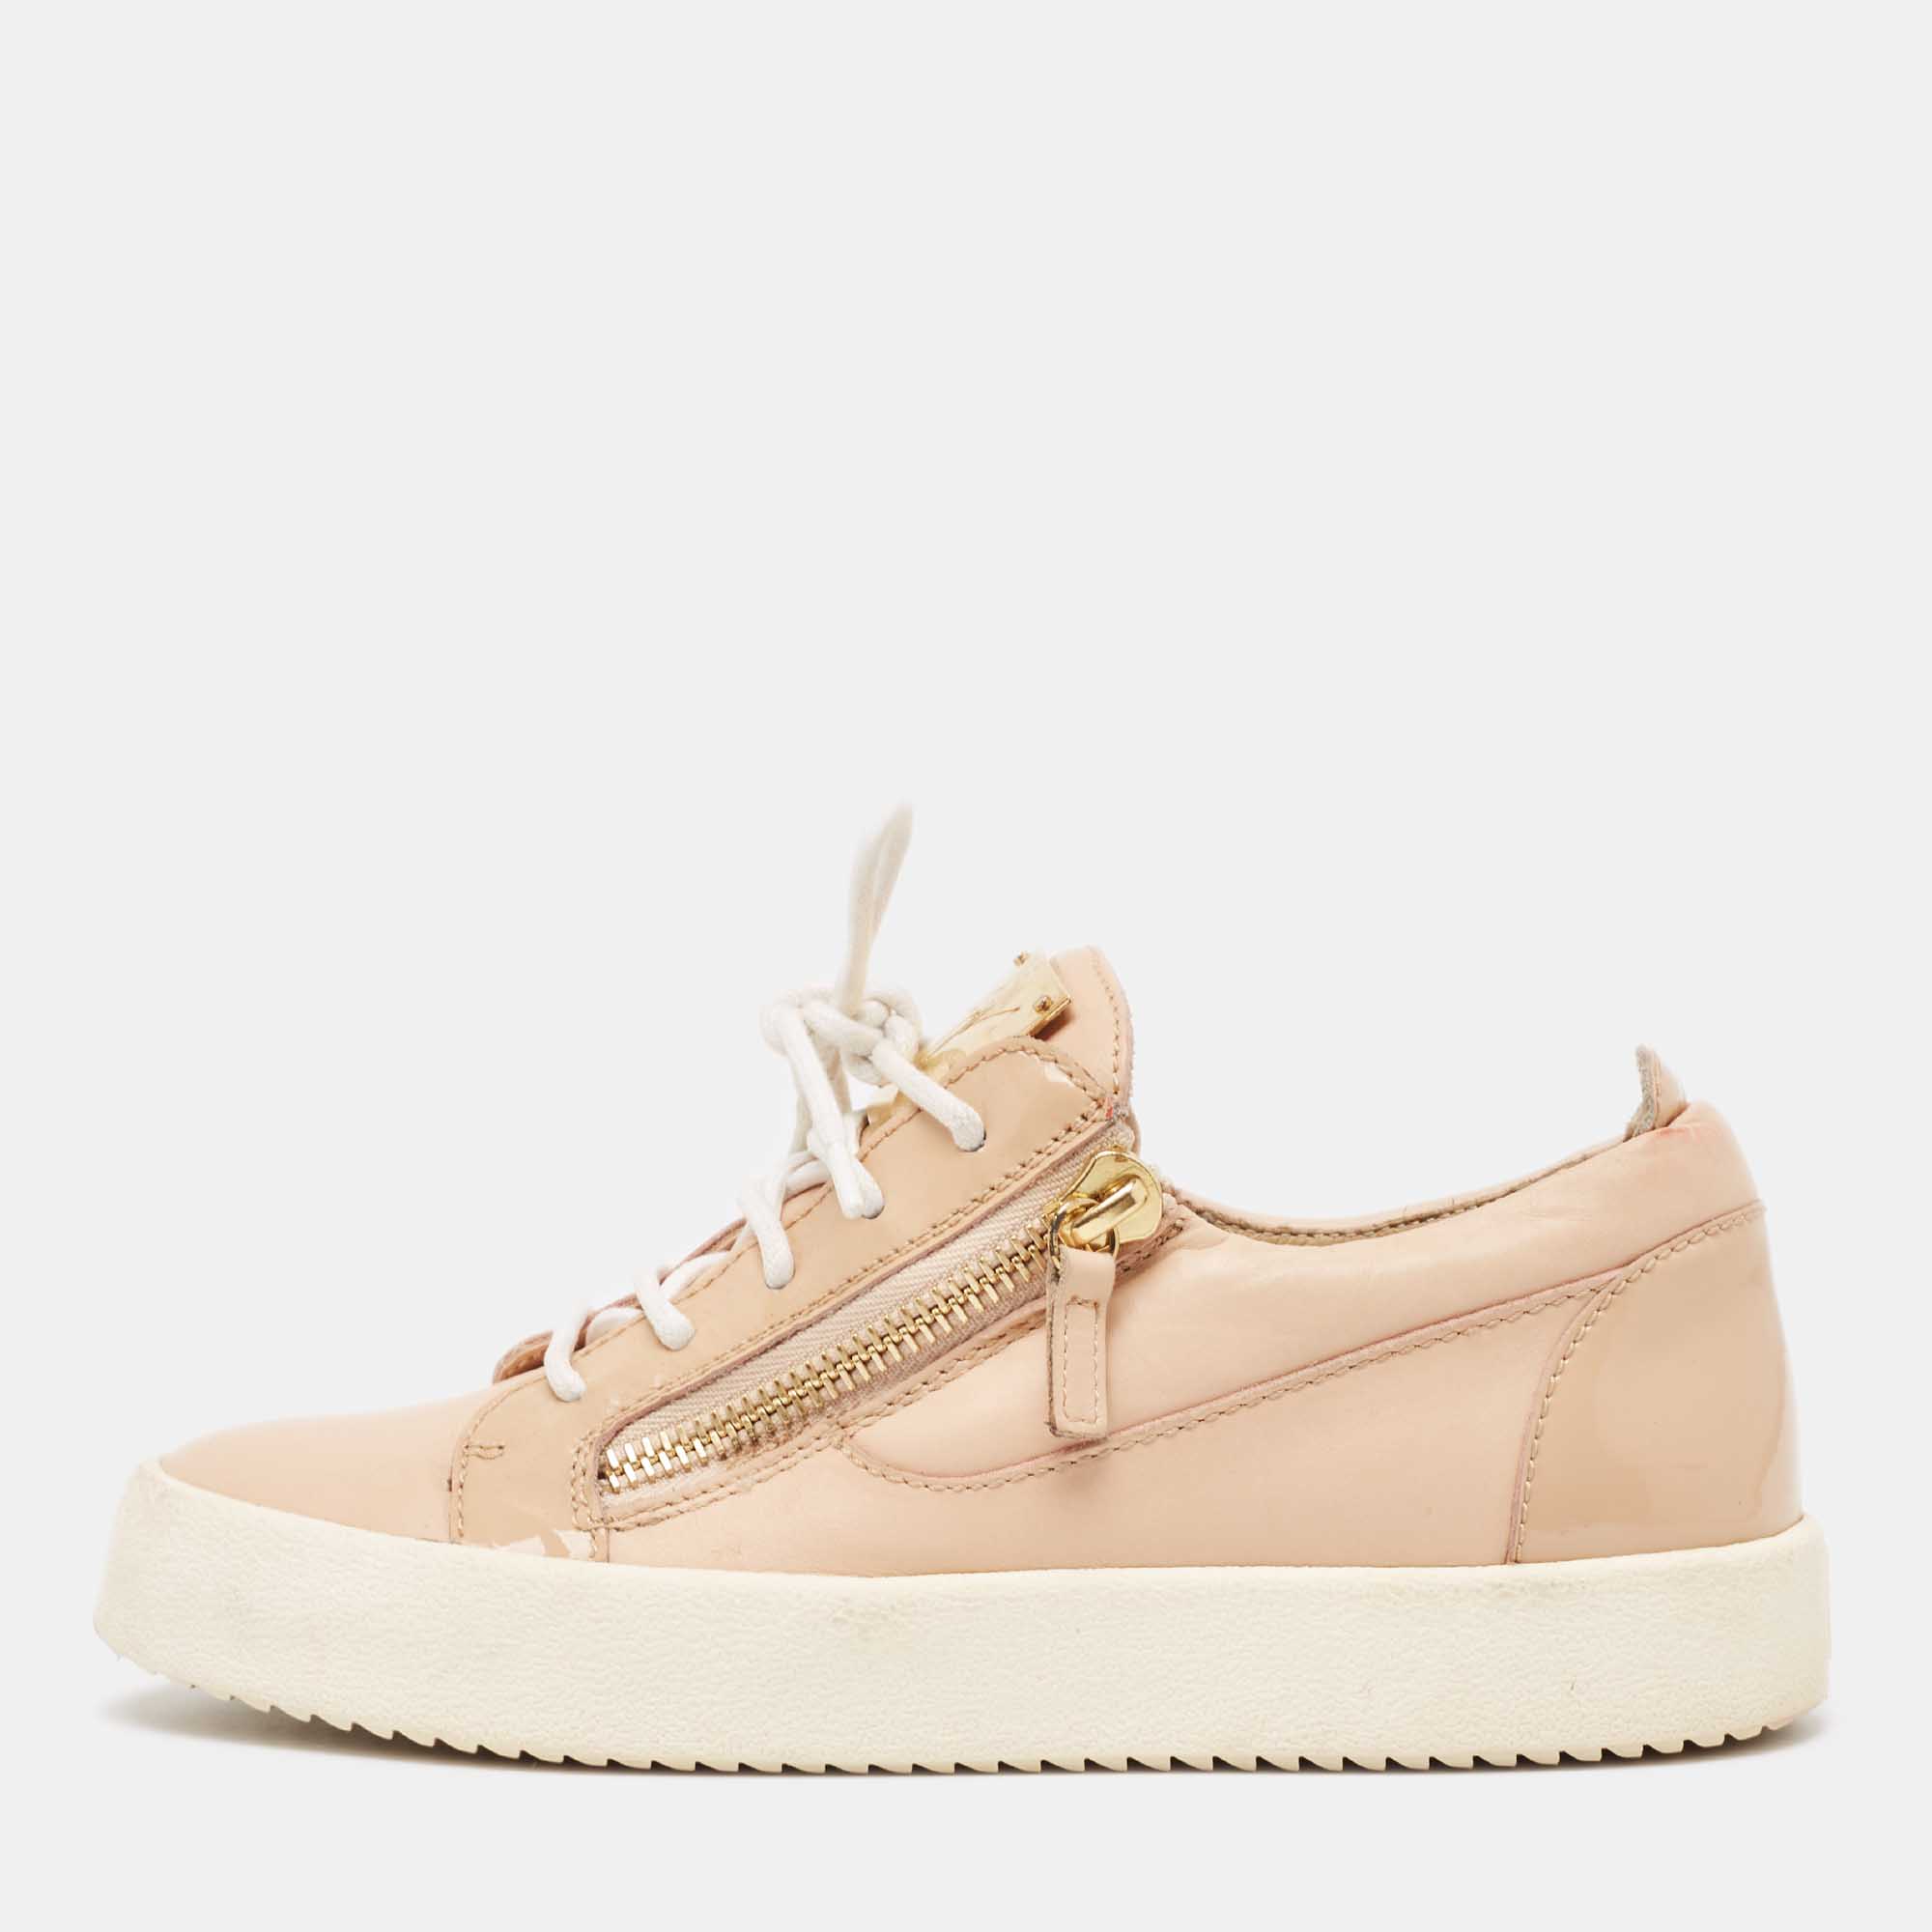 

Giuseppe Zanotti Beige Patent and Leather Double Zipper Low Top Sneakers Size